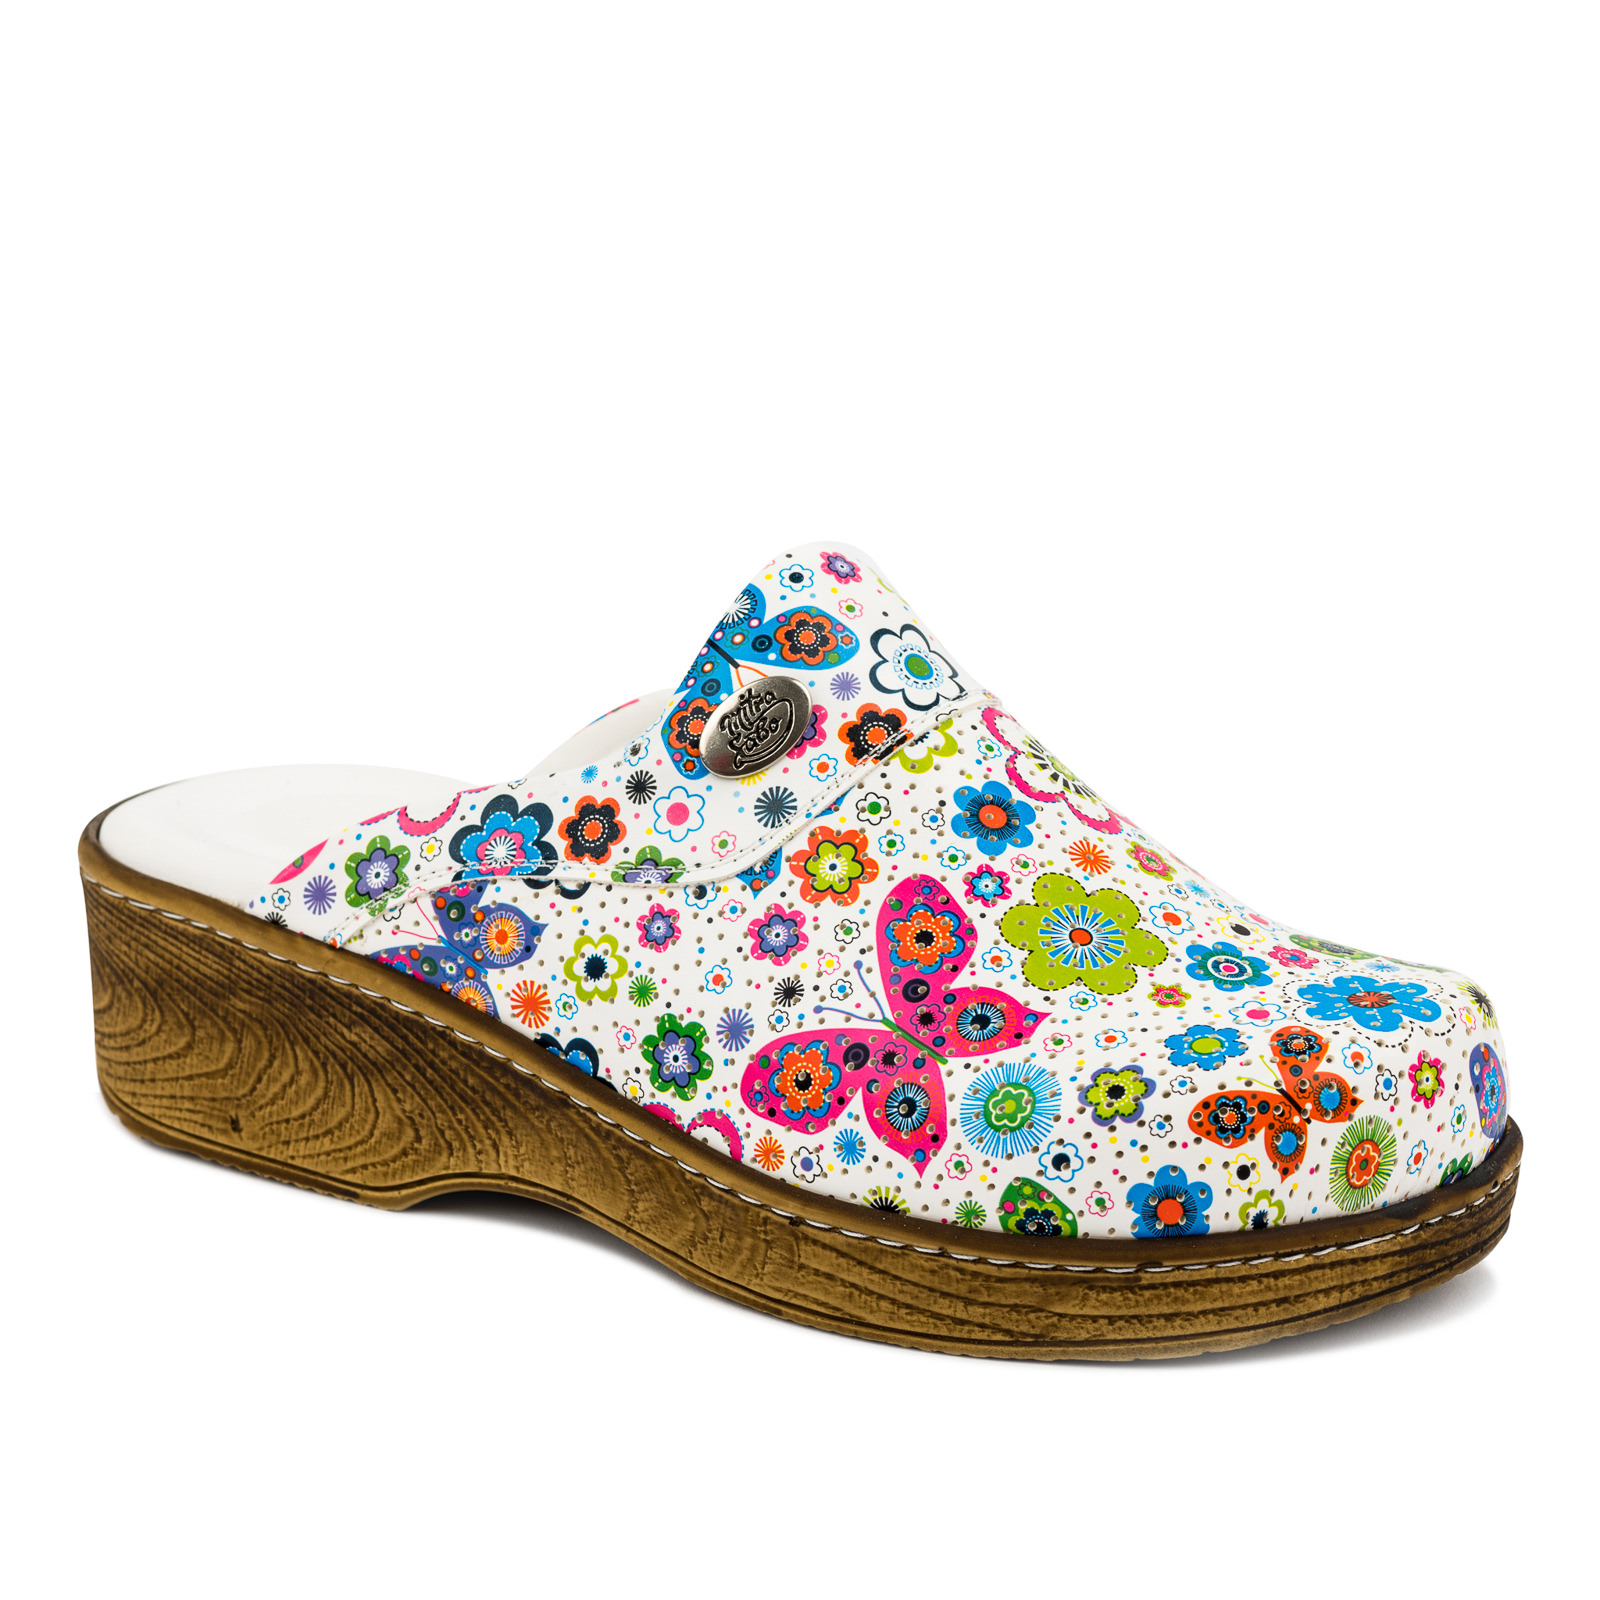 FLOWER HOLLOW HIGH BROWN SOLE CLOGS - WHITE